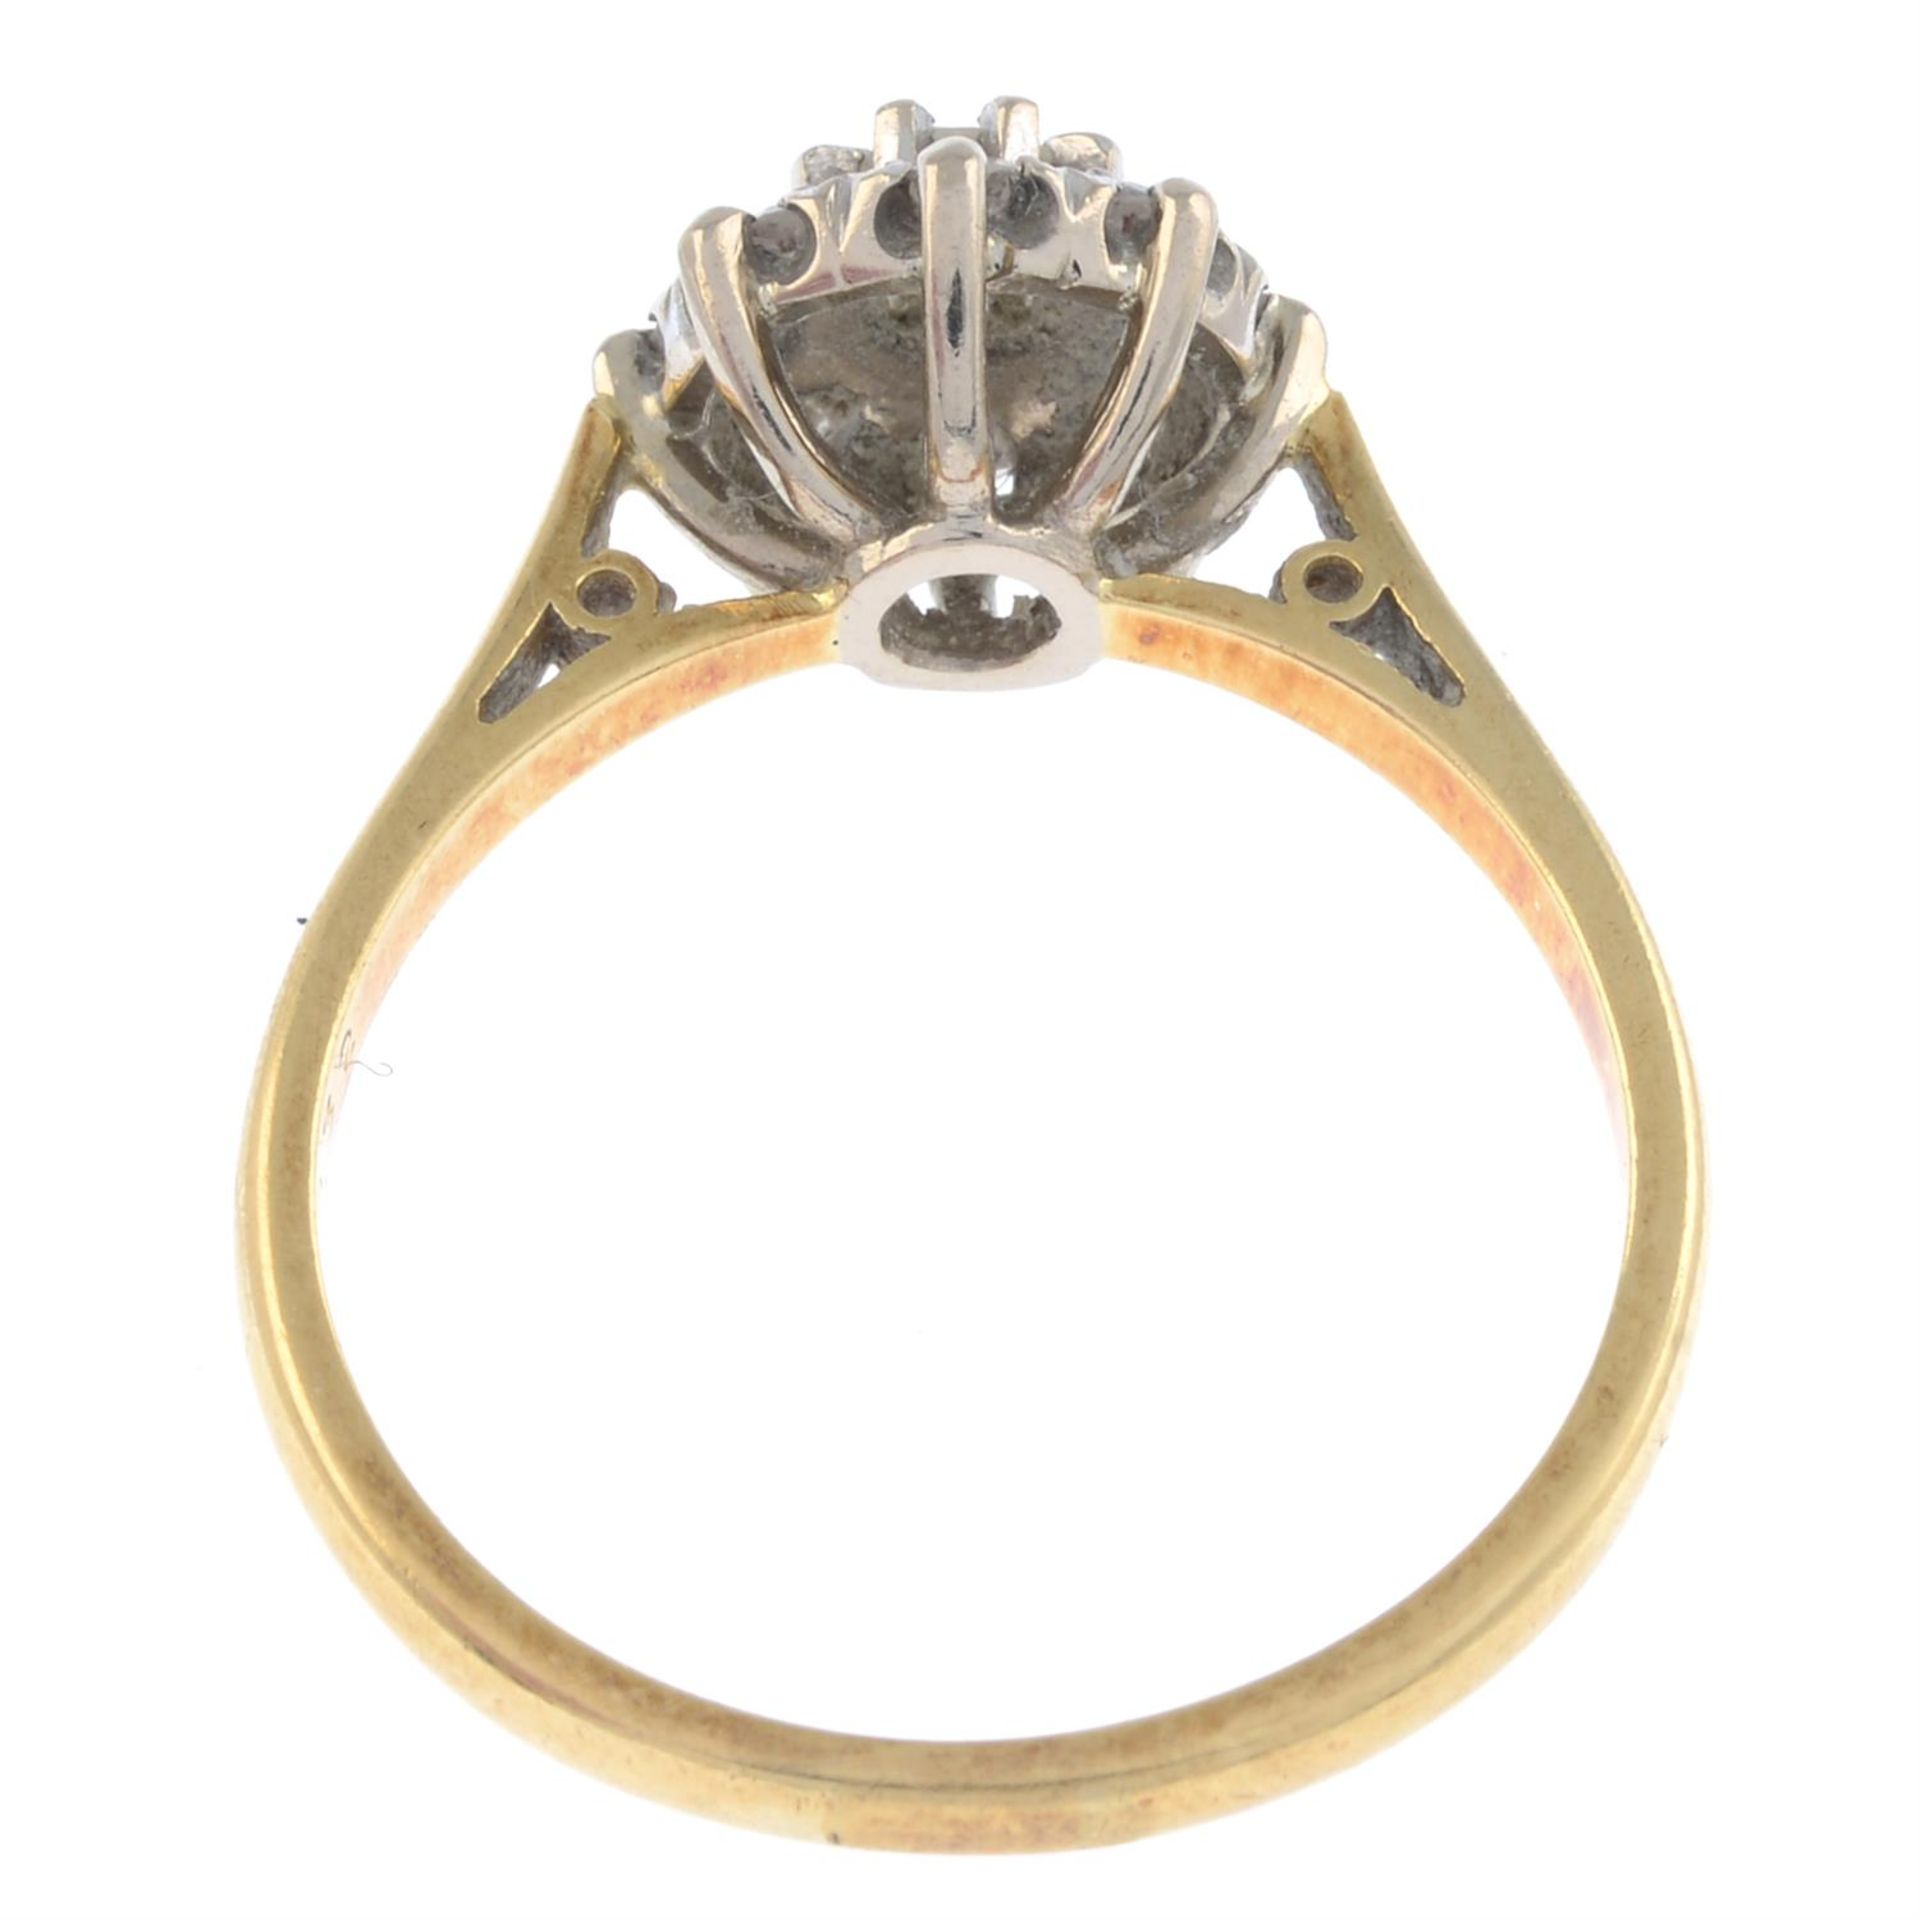 Mid 20th century 18ct gold diamond cluster ring - Image 2 of 2